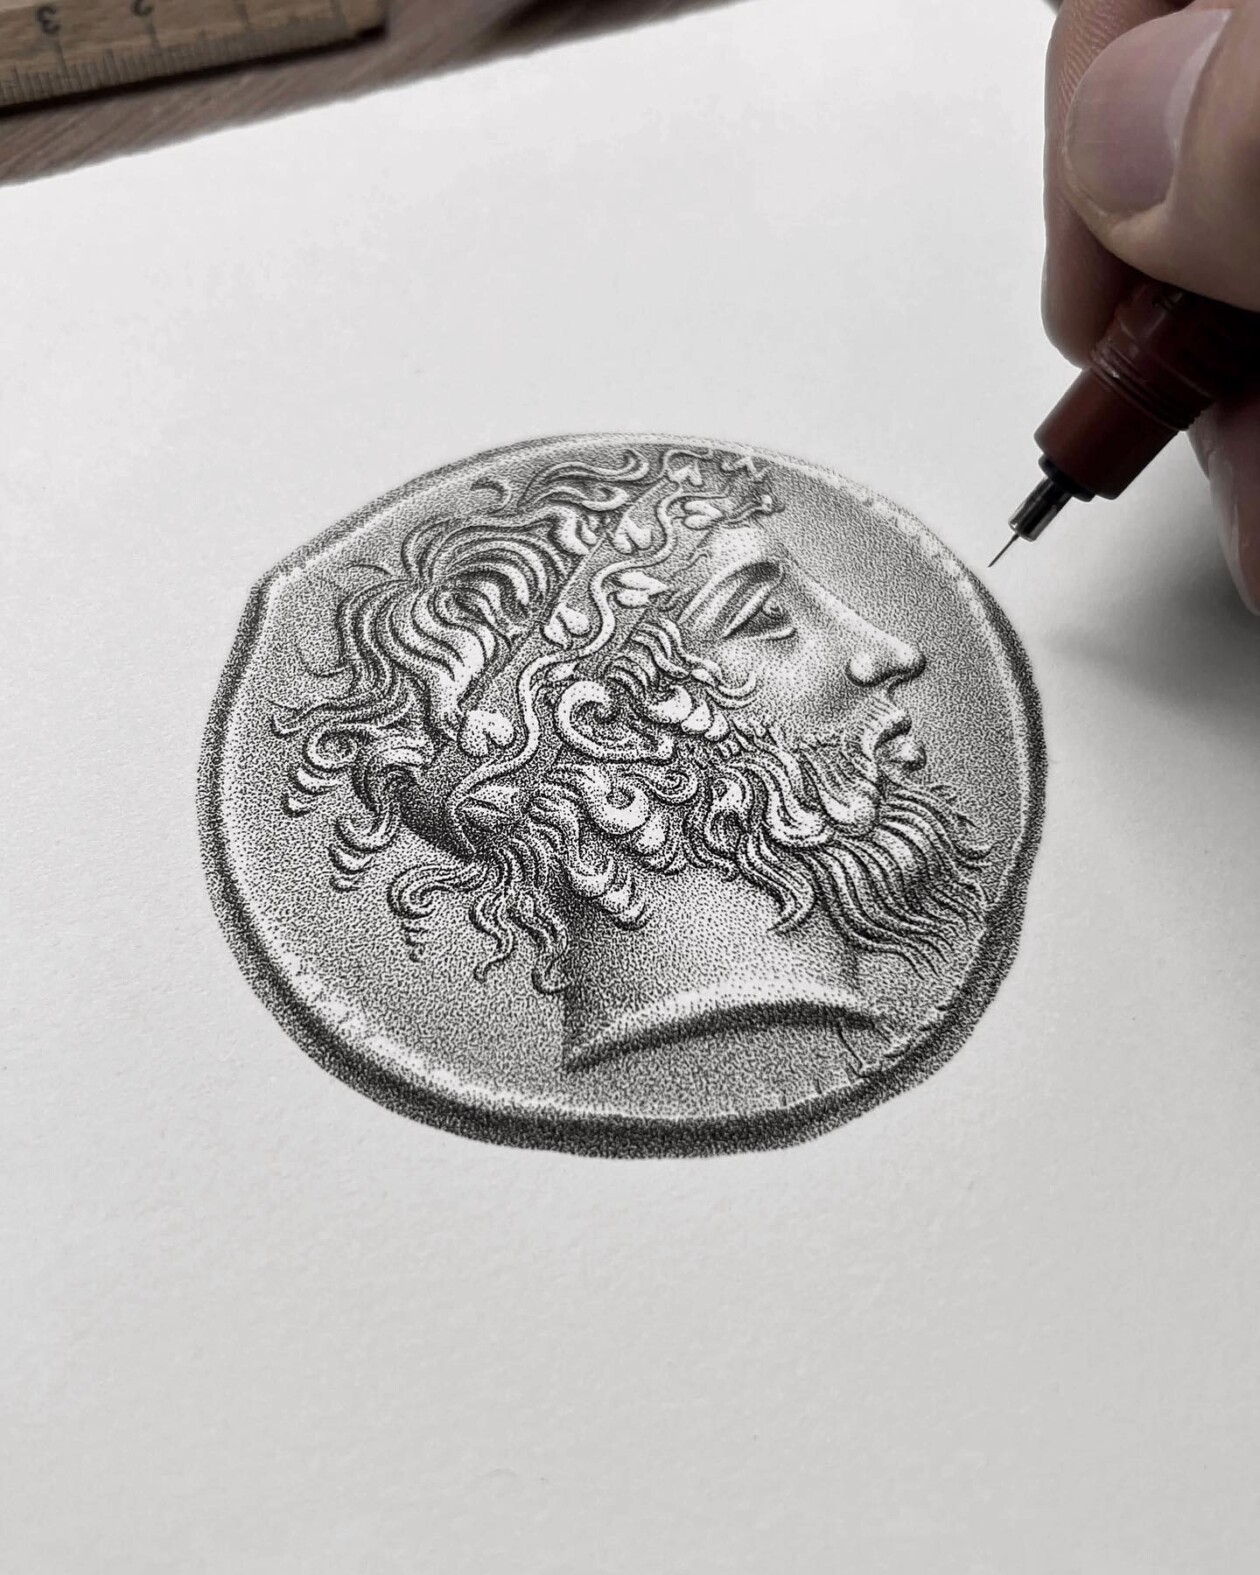 Detailed Stipple Illustrations Made Of Tens Of Millions Of Ink Dots By Xavier Casalta (14)